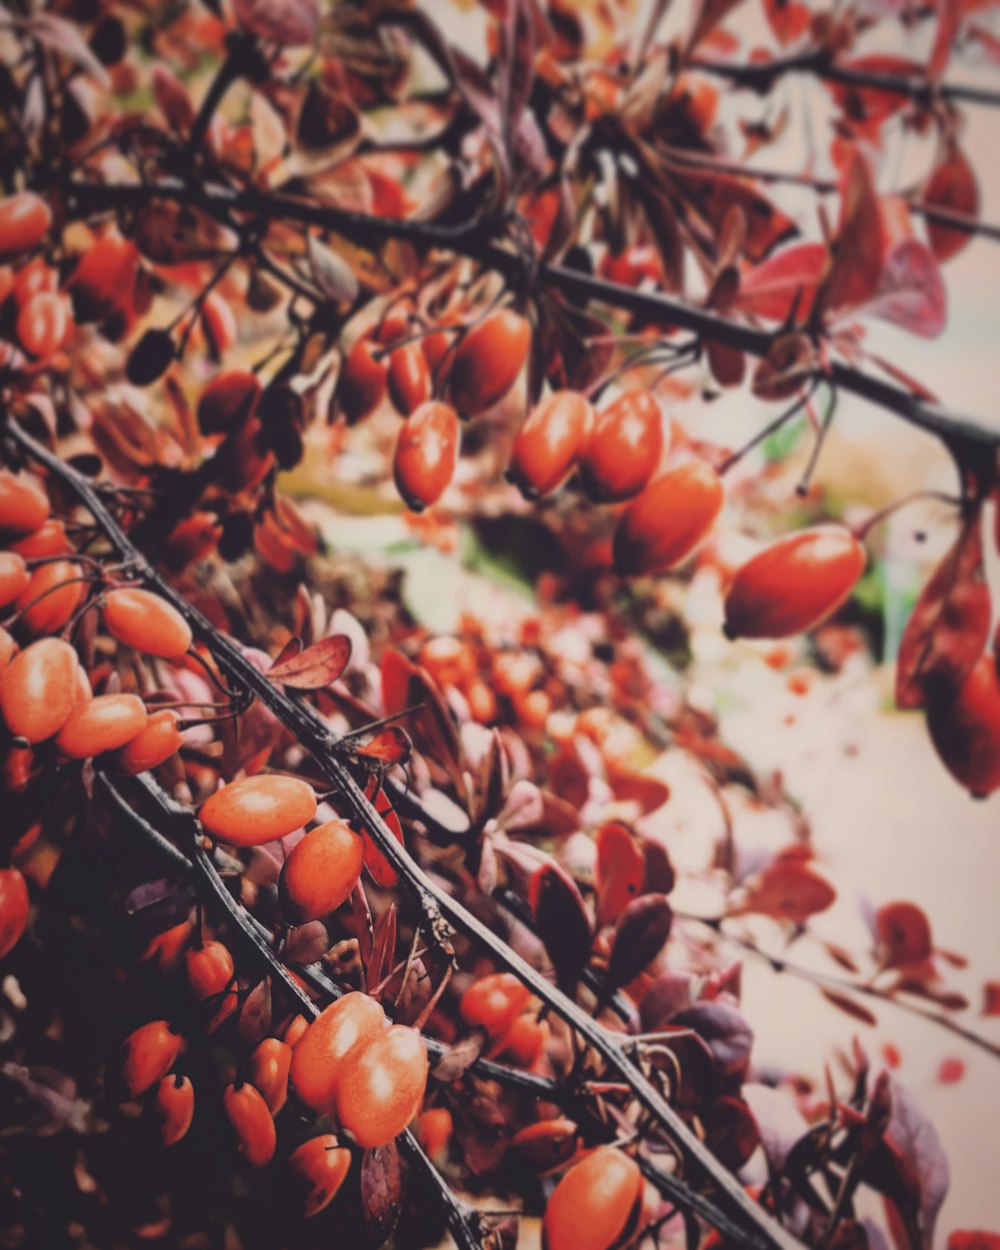 red round fruits on tree